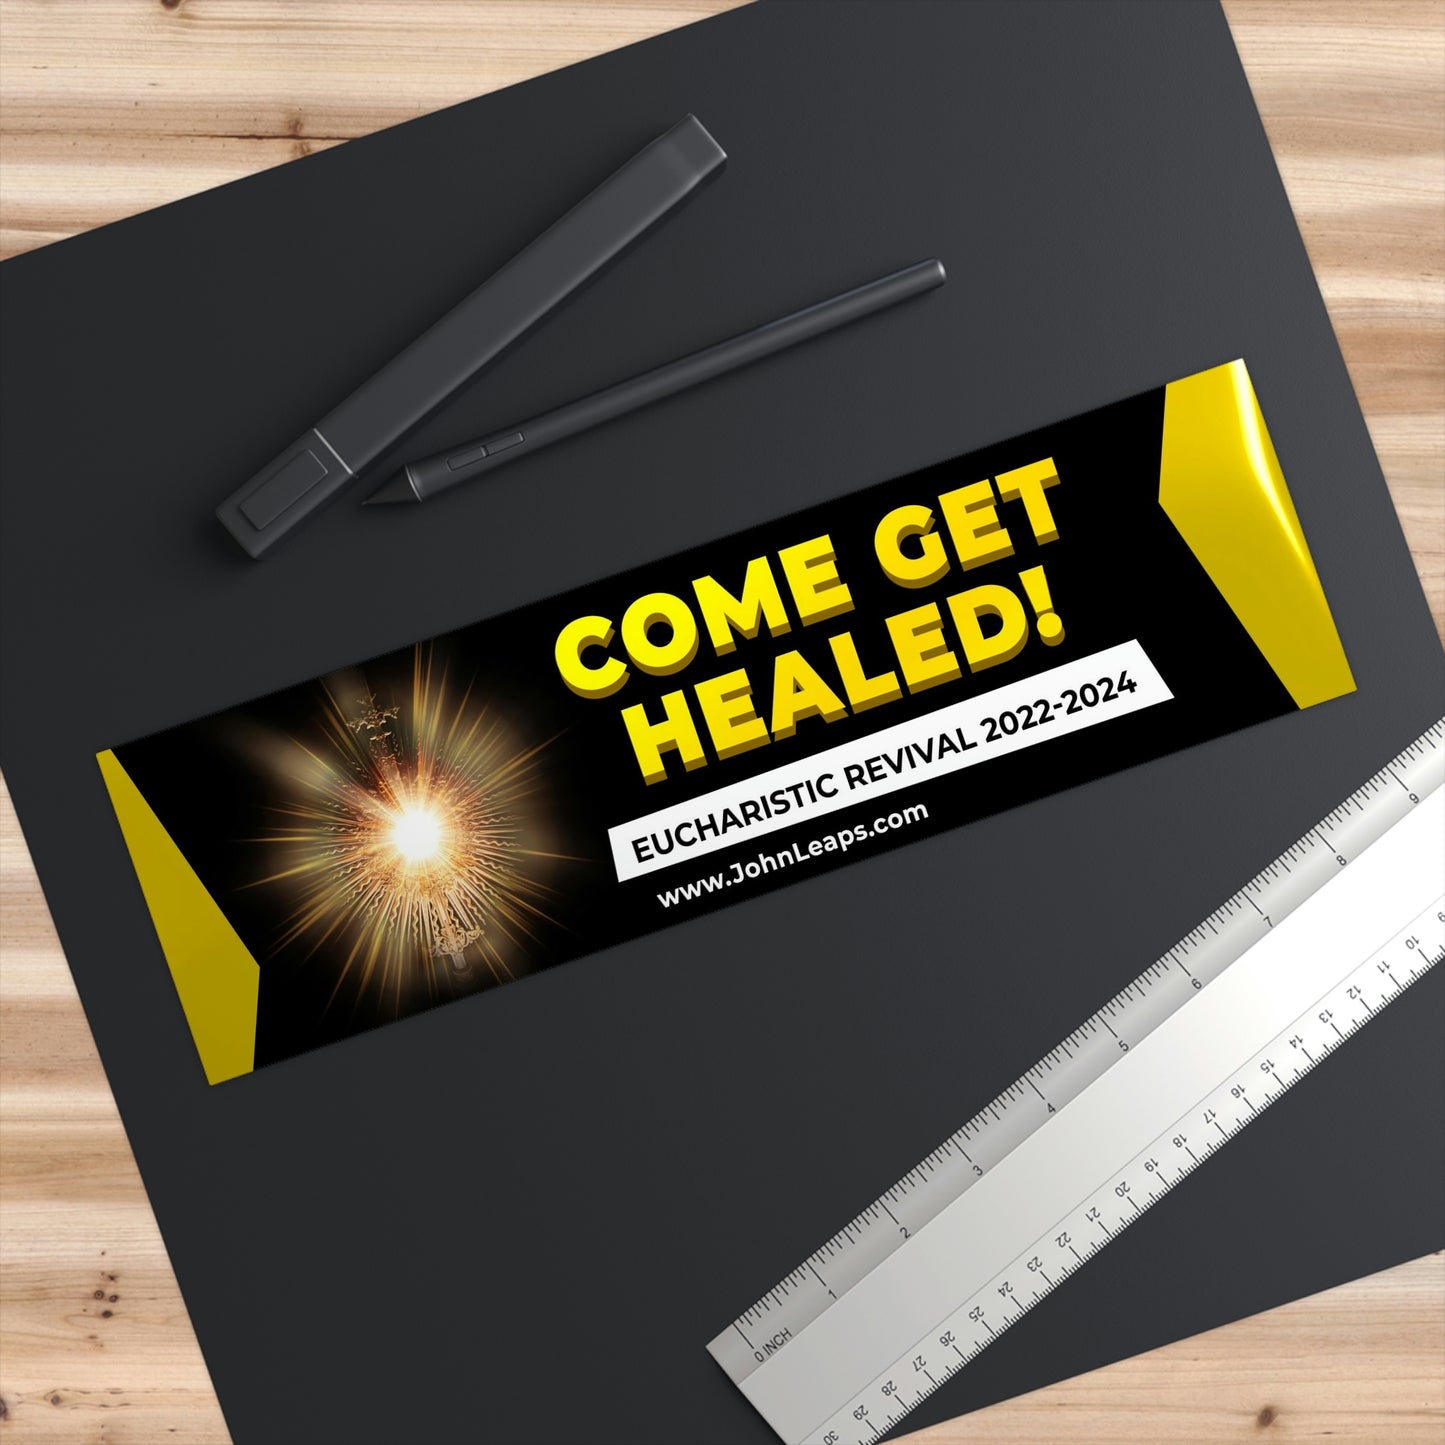 Come get healed! Bumper Stickers